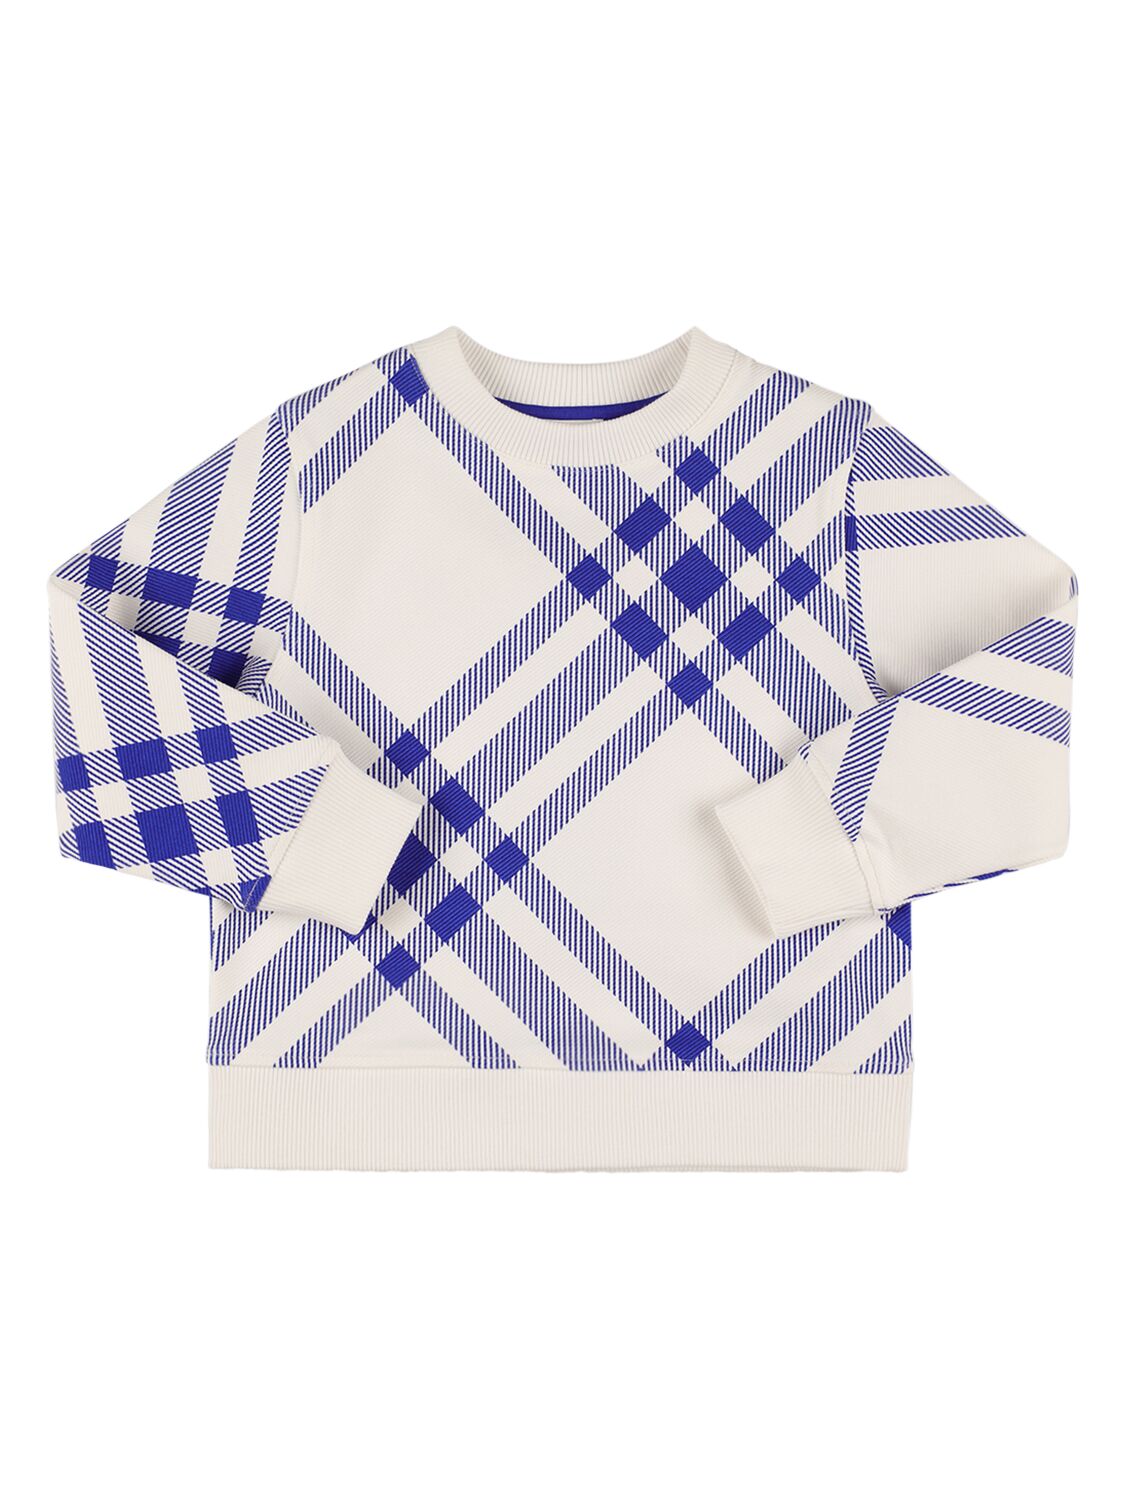 Burberry Kids' Check Print Cotton Knit Jumper In Blue